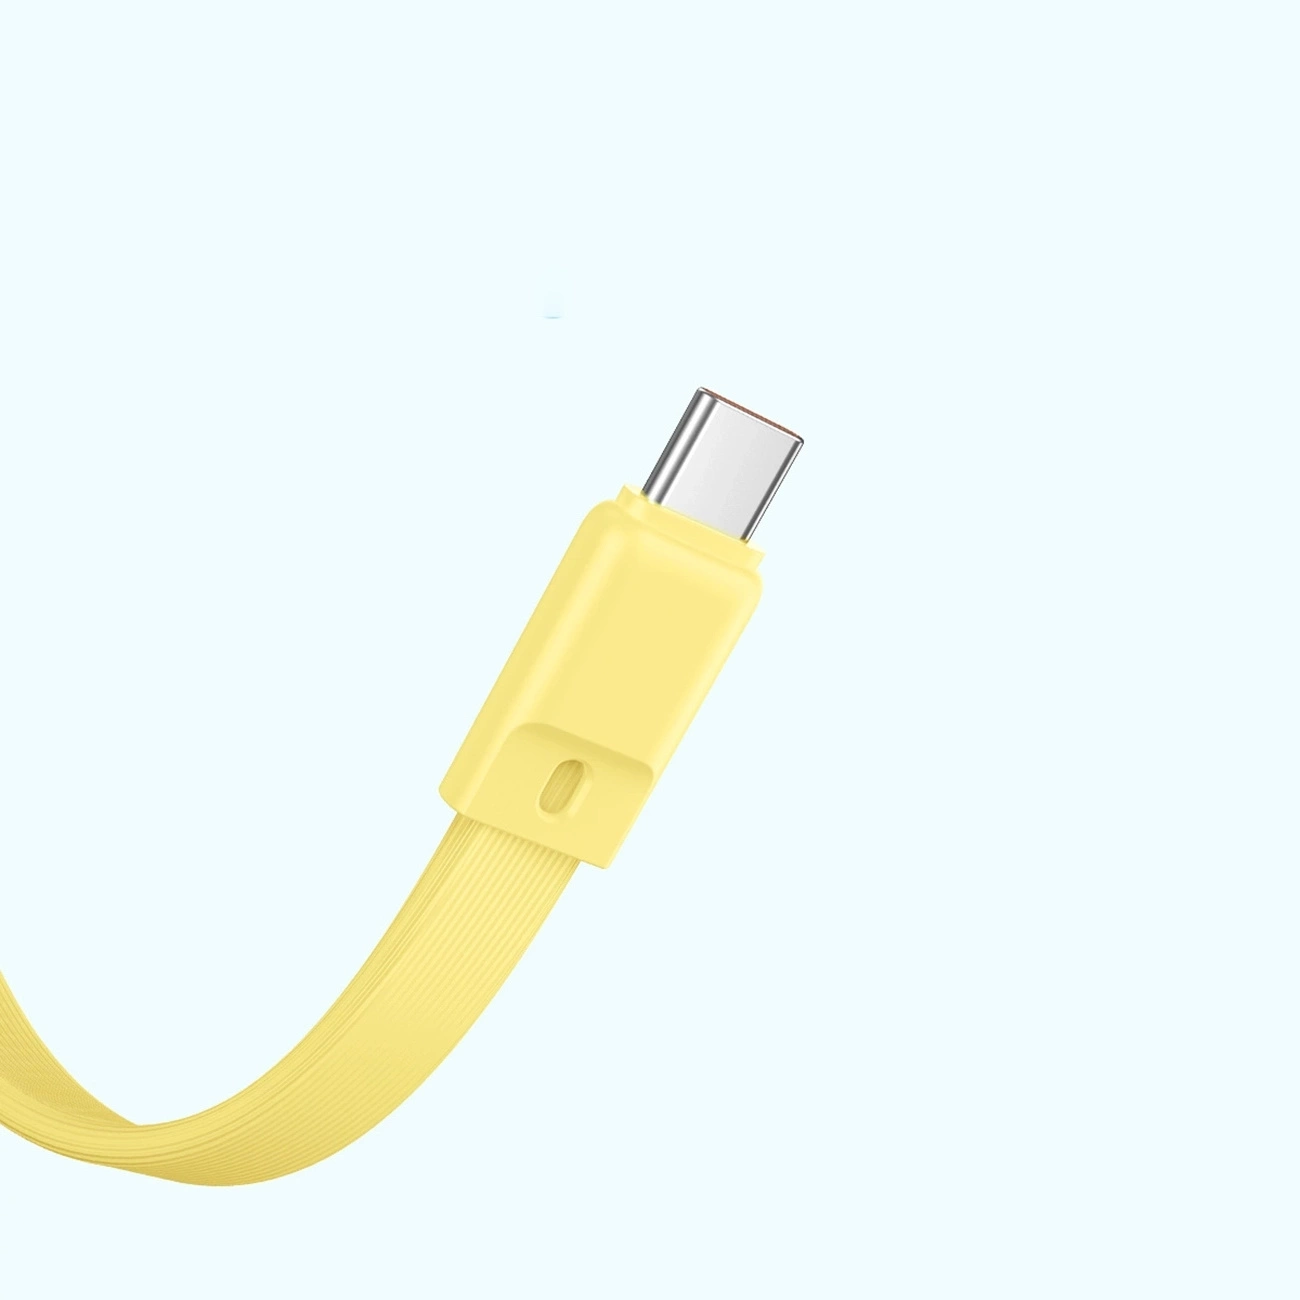 Cable with a USB-C connector on a blue background